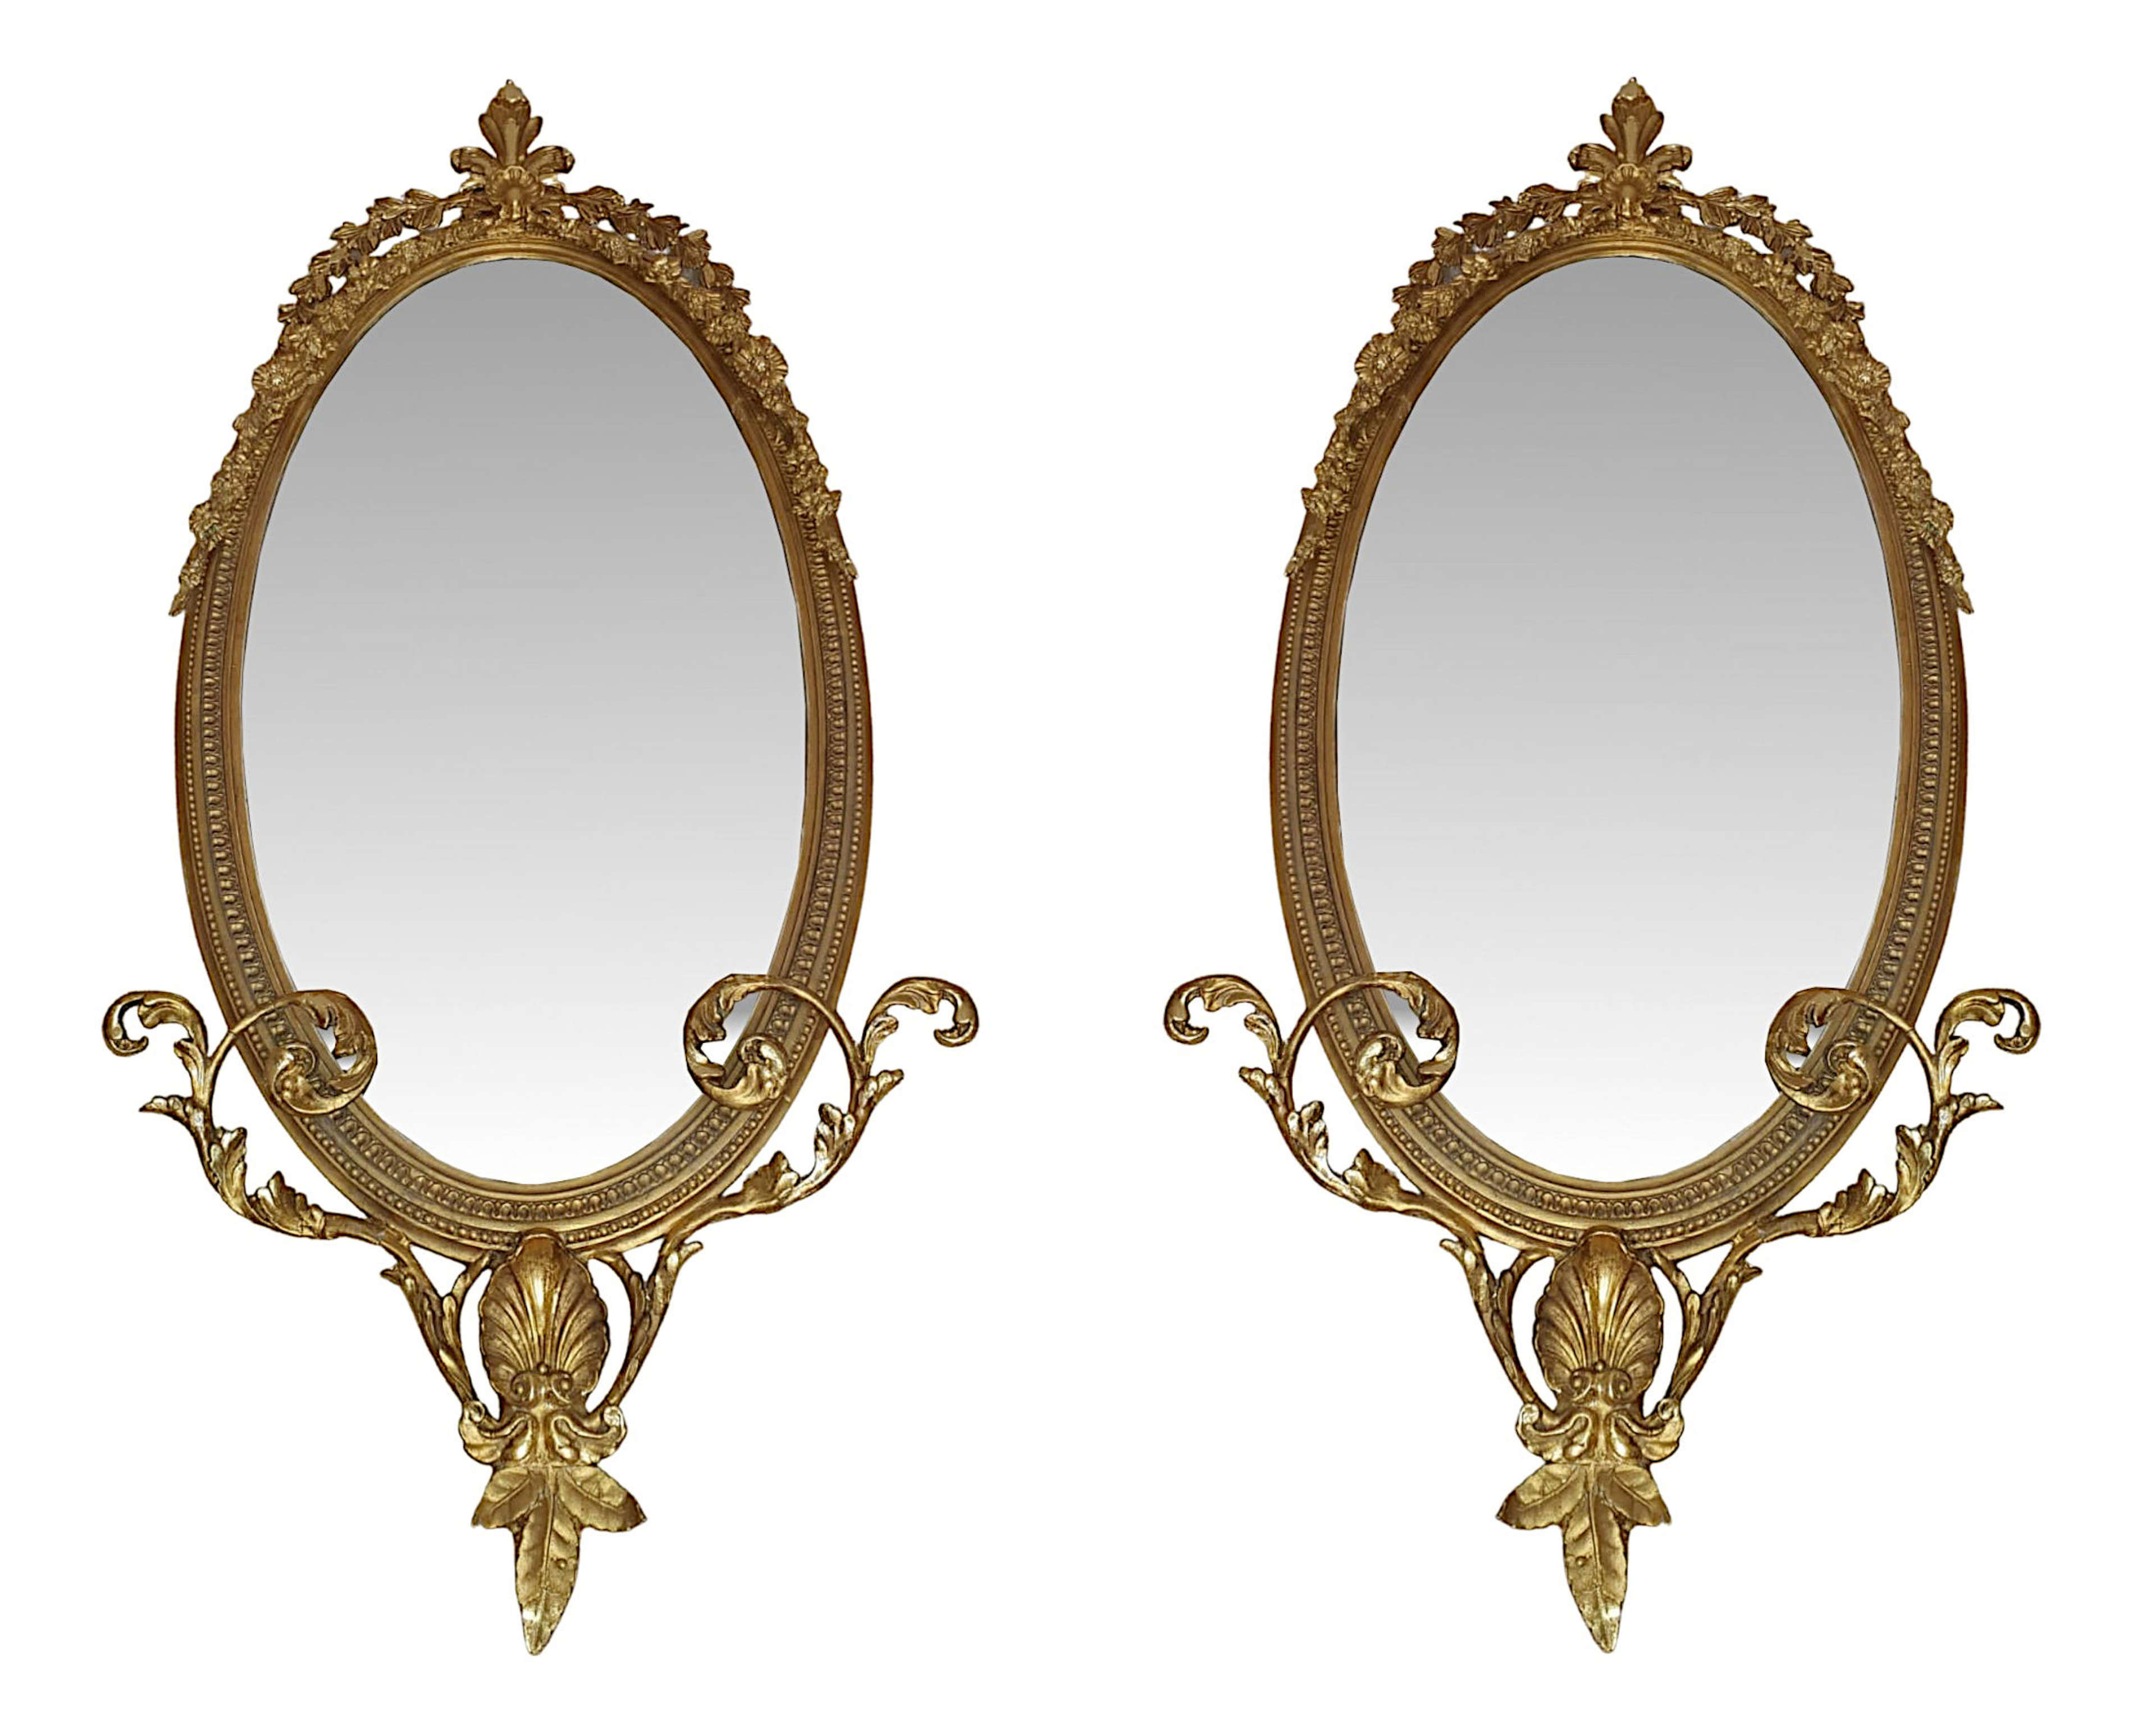 A Very Fine and Rare Pair of 19th Century Giltwood Pier Mirrors